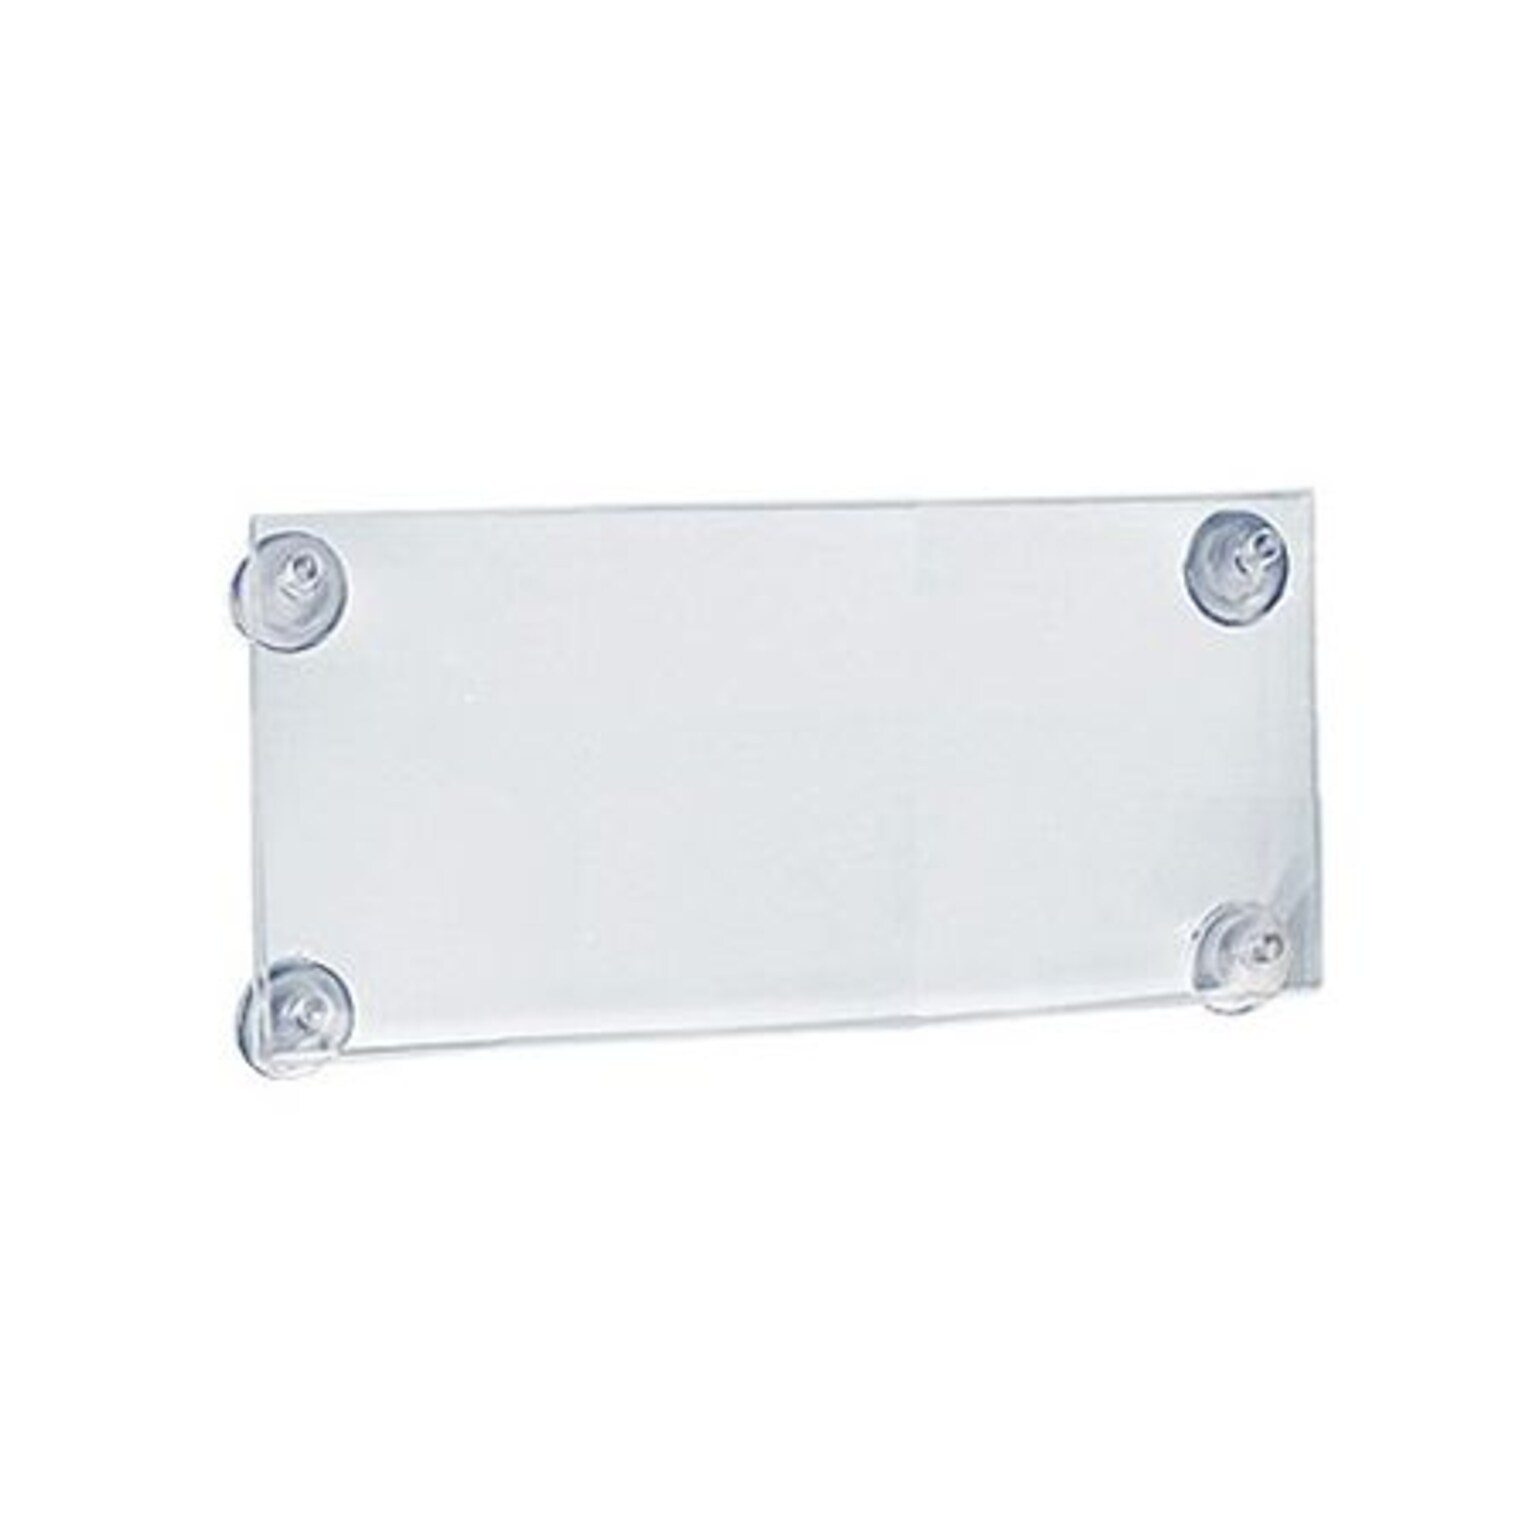 Azar Displays Clear Acrylic Window/Door Sign Holder Frame with Suction Cups 8.5W x 5.5H, 2-Pack (106627)